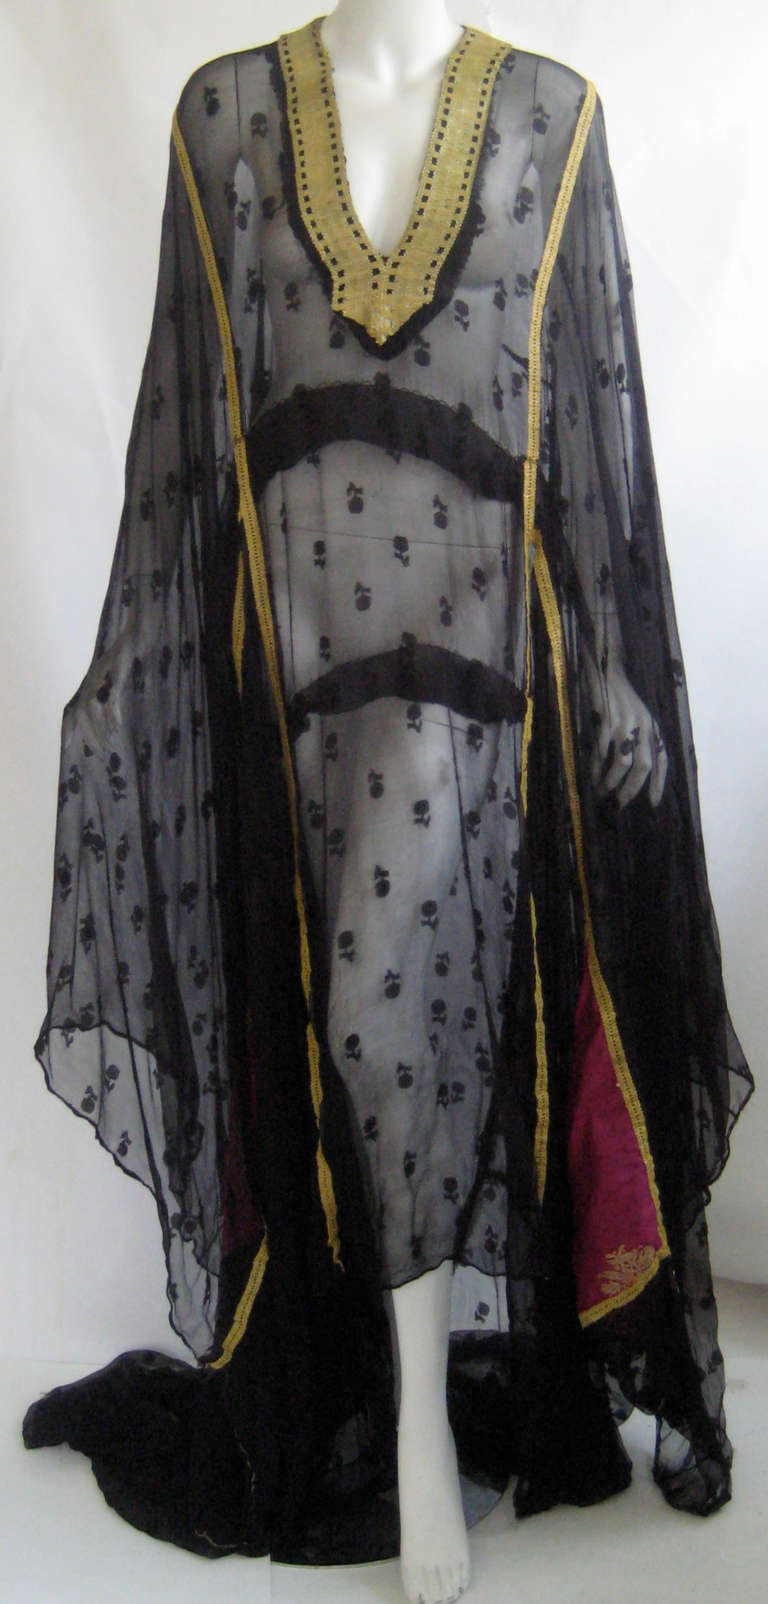 Wonderful silk chiffon caftan with fuchsia silk triangular inserts and gold  bullion trim 
Most likely Persian Gulf in origin
This is cut in a t shape with very wide sleeve cuffs 
Train in back 
Wearable with care
Shown on a size 6 mannequin